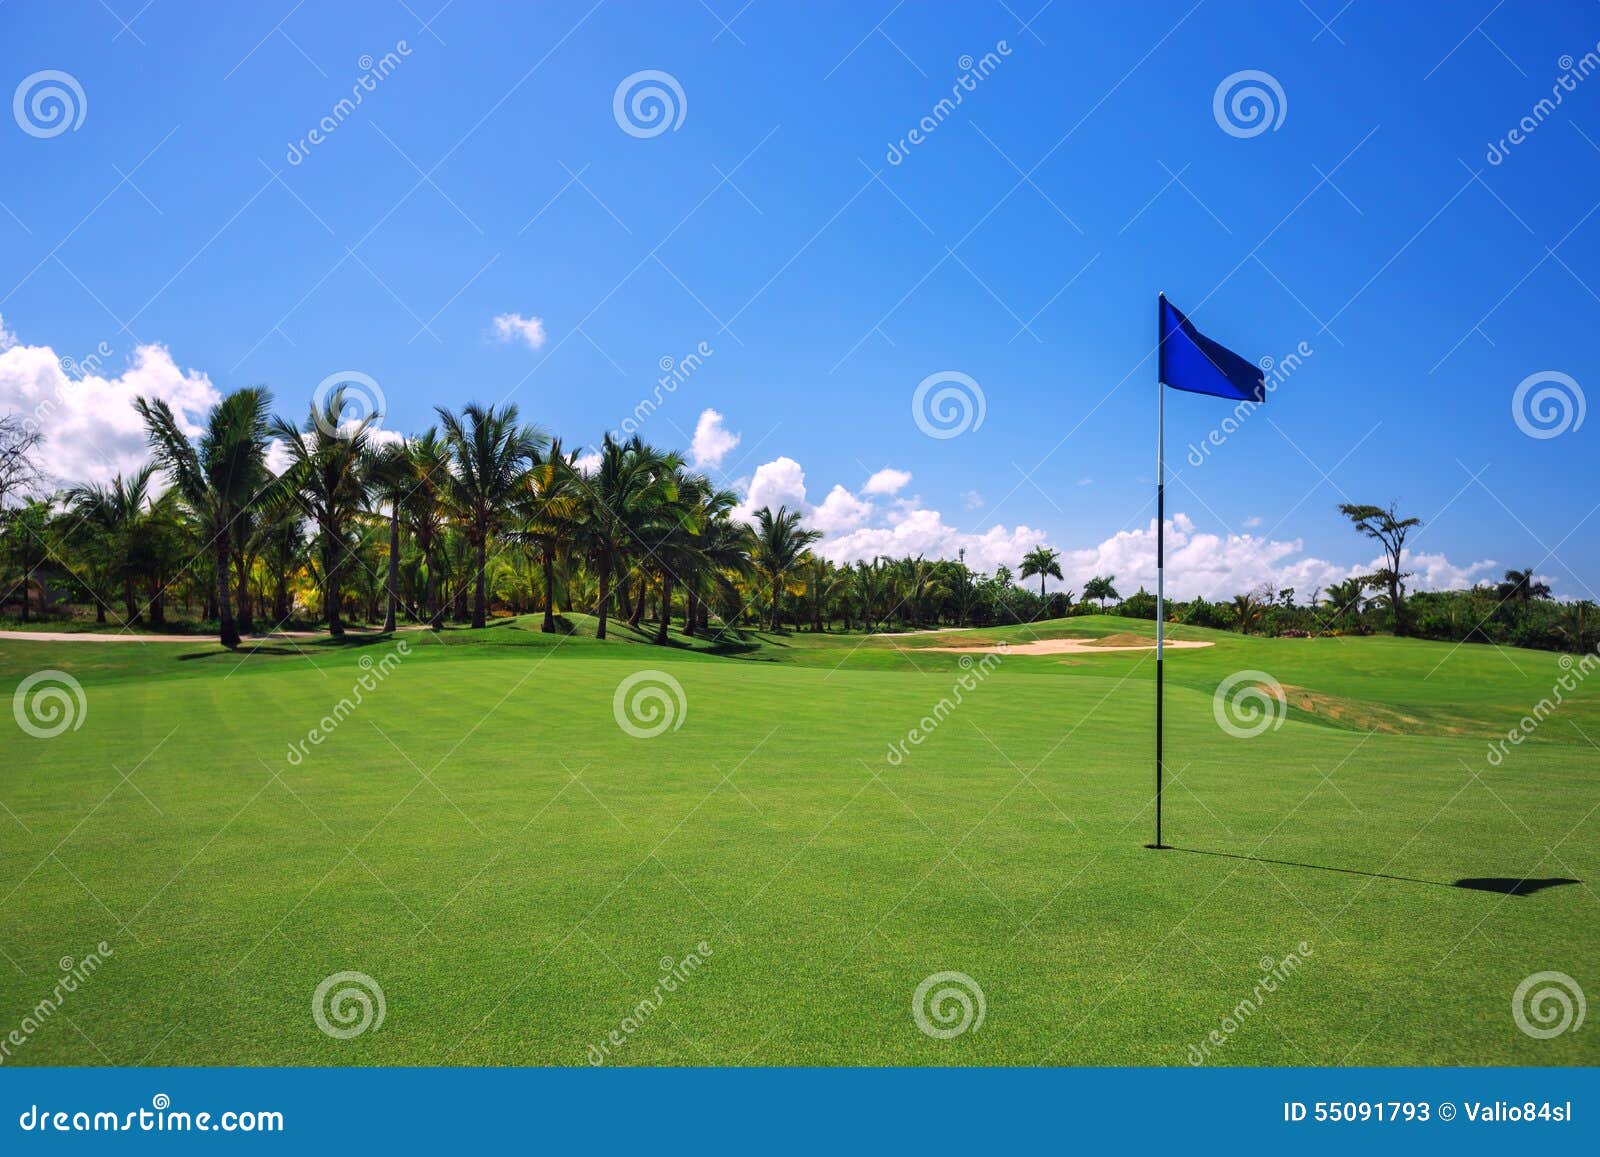 beautiful landscape of a golf court with palm trees